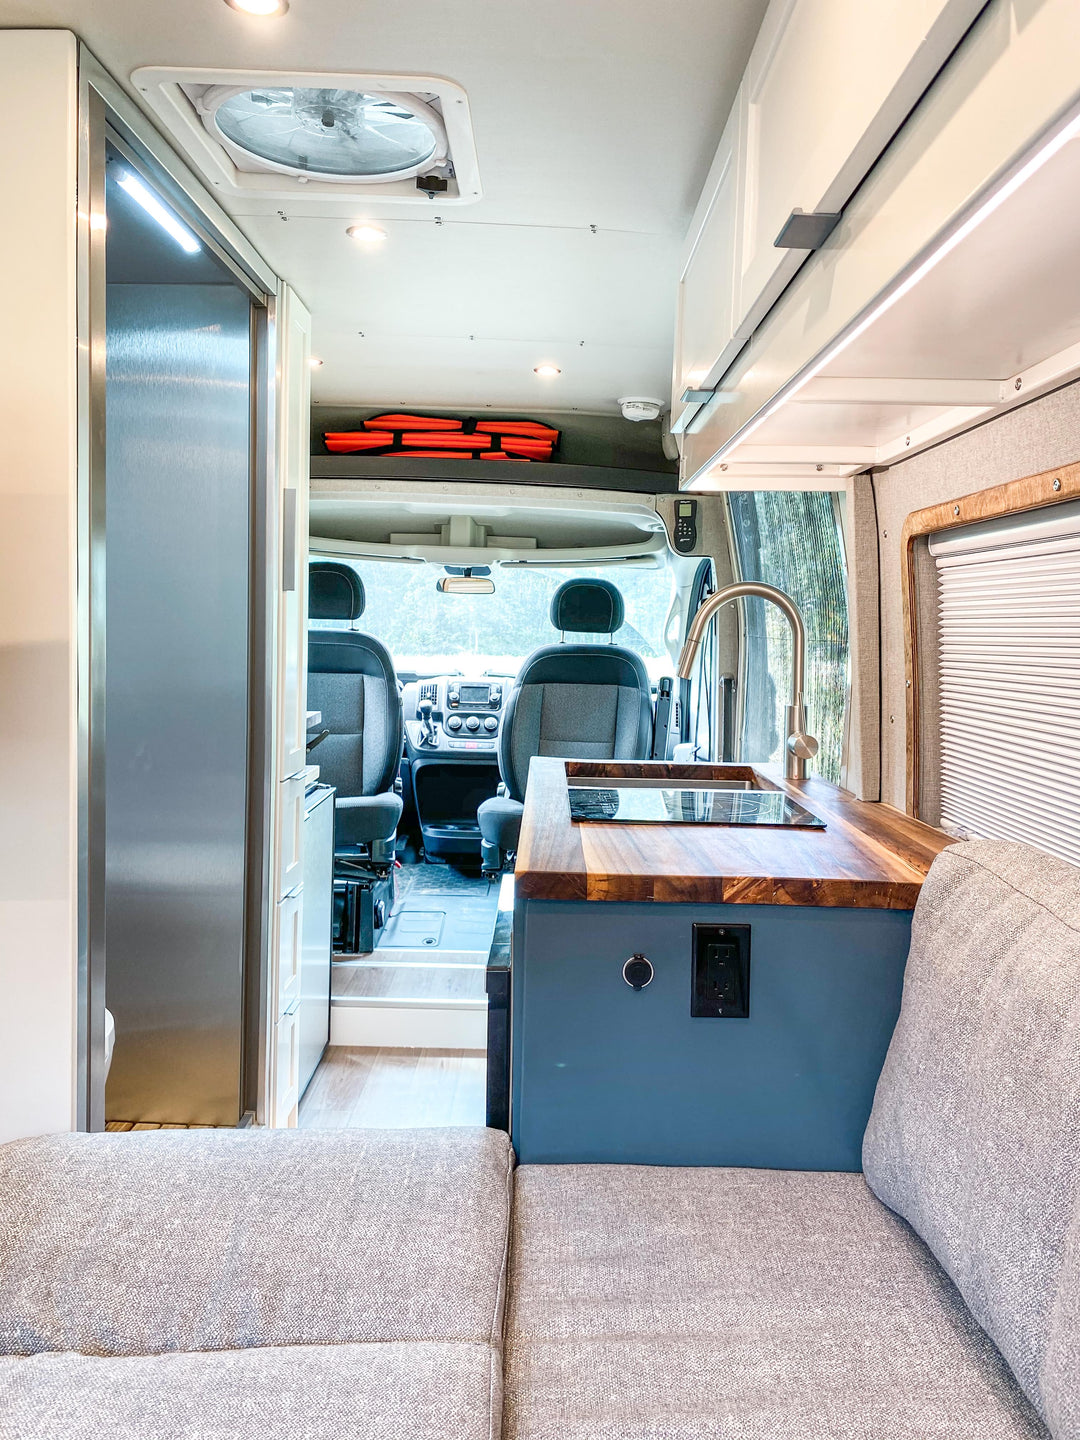  promaster van conversion - Back to front